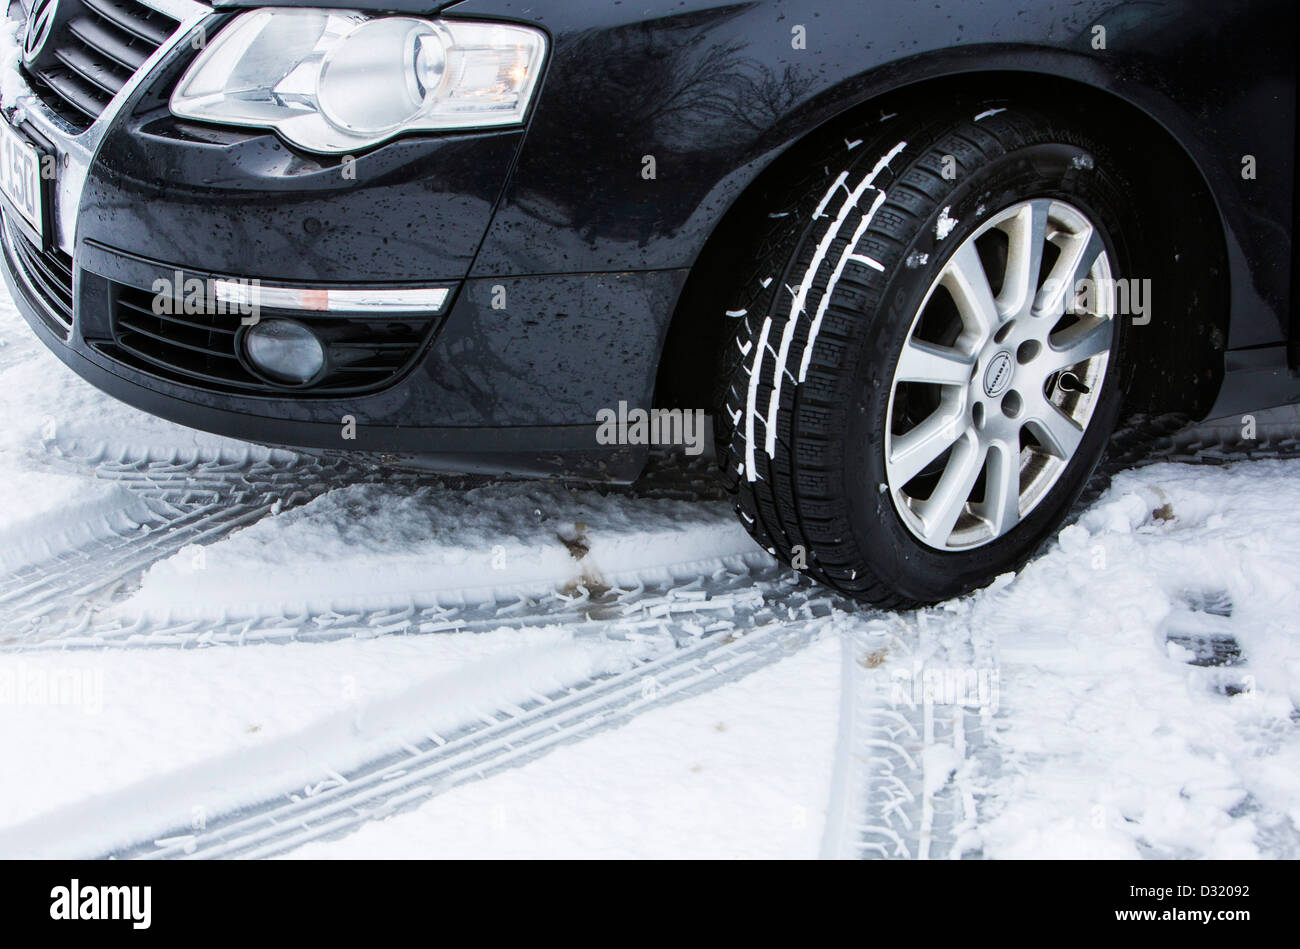 Car with winter tires drives on a road with snow cover. Stock Photo